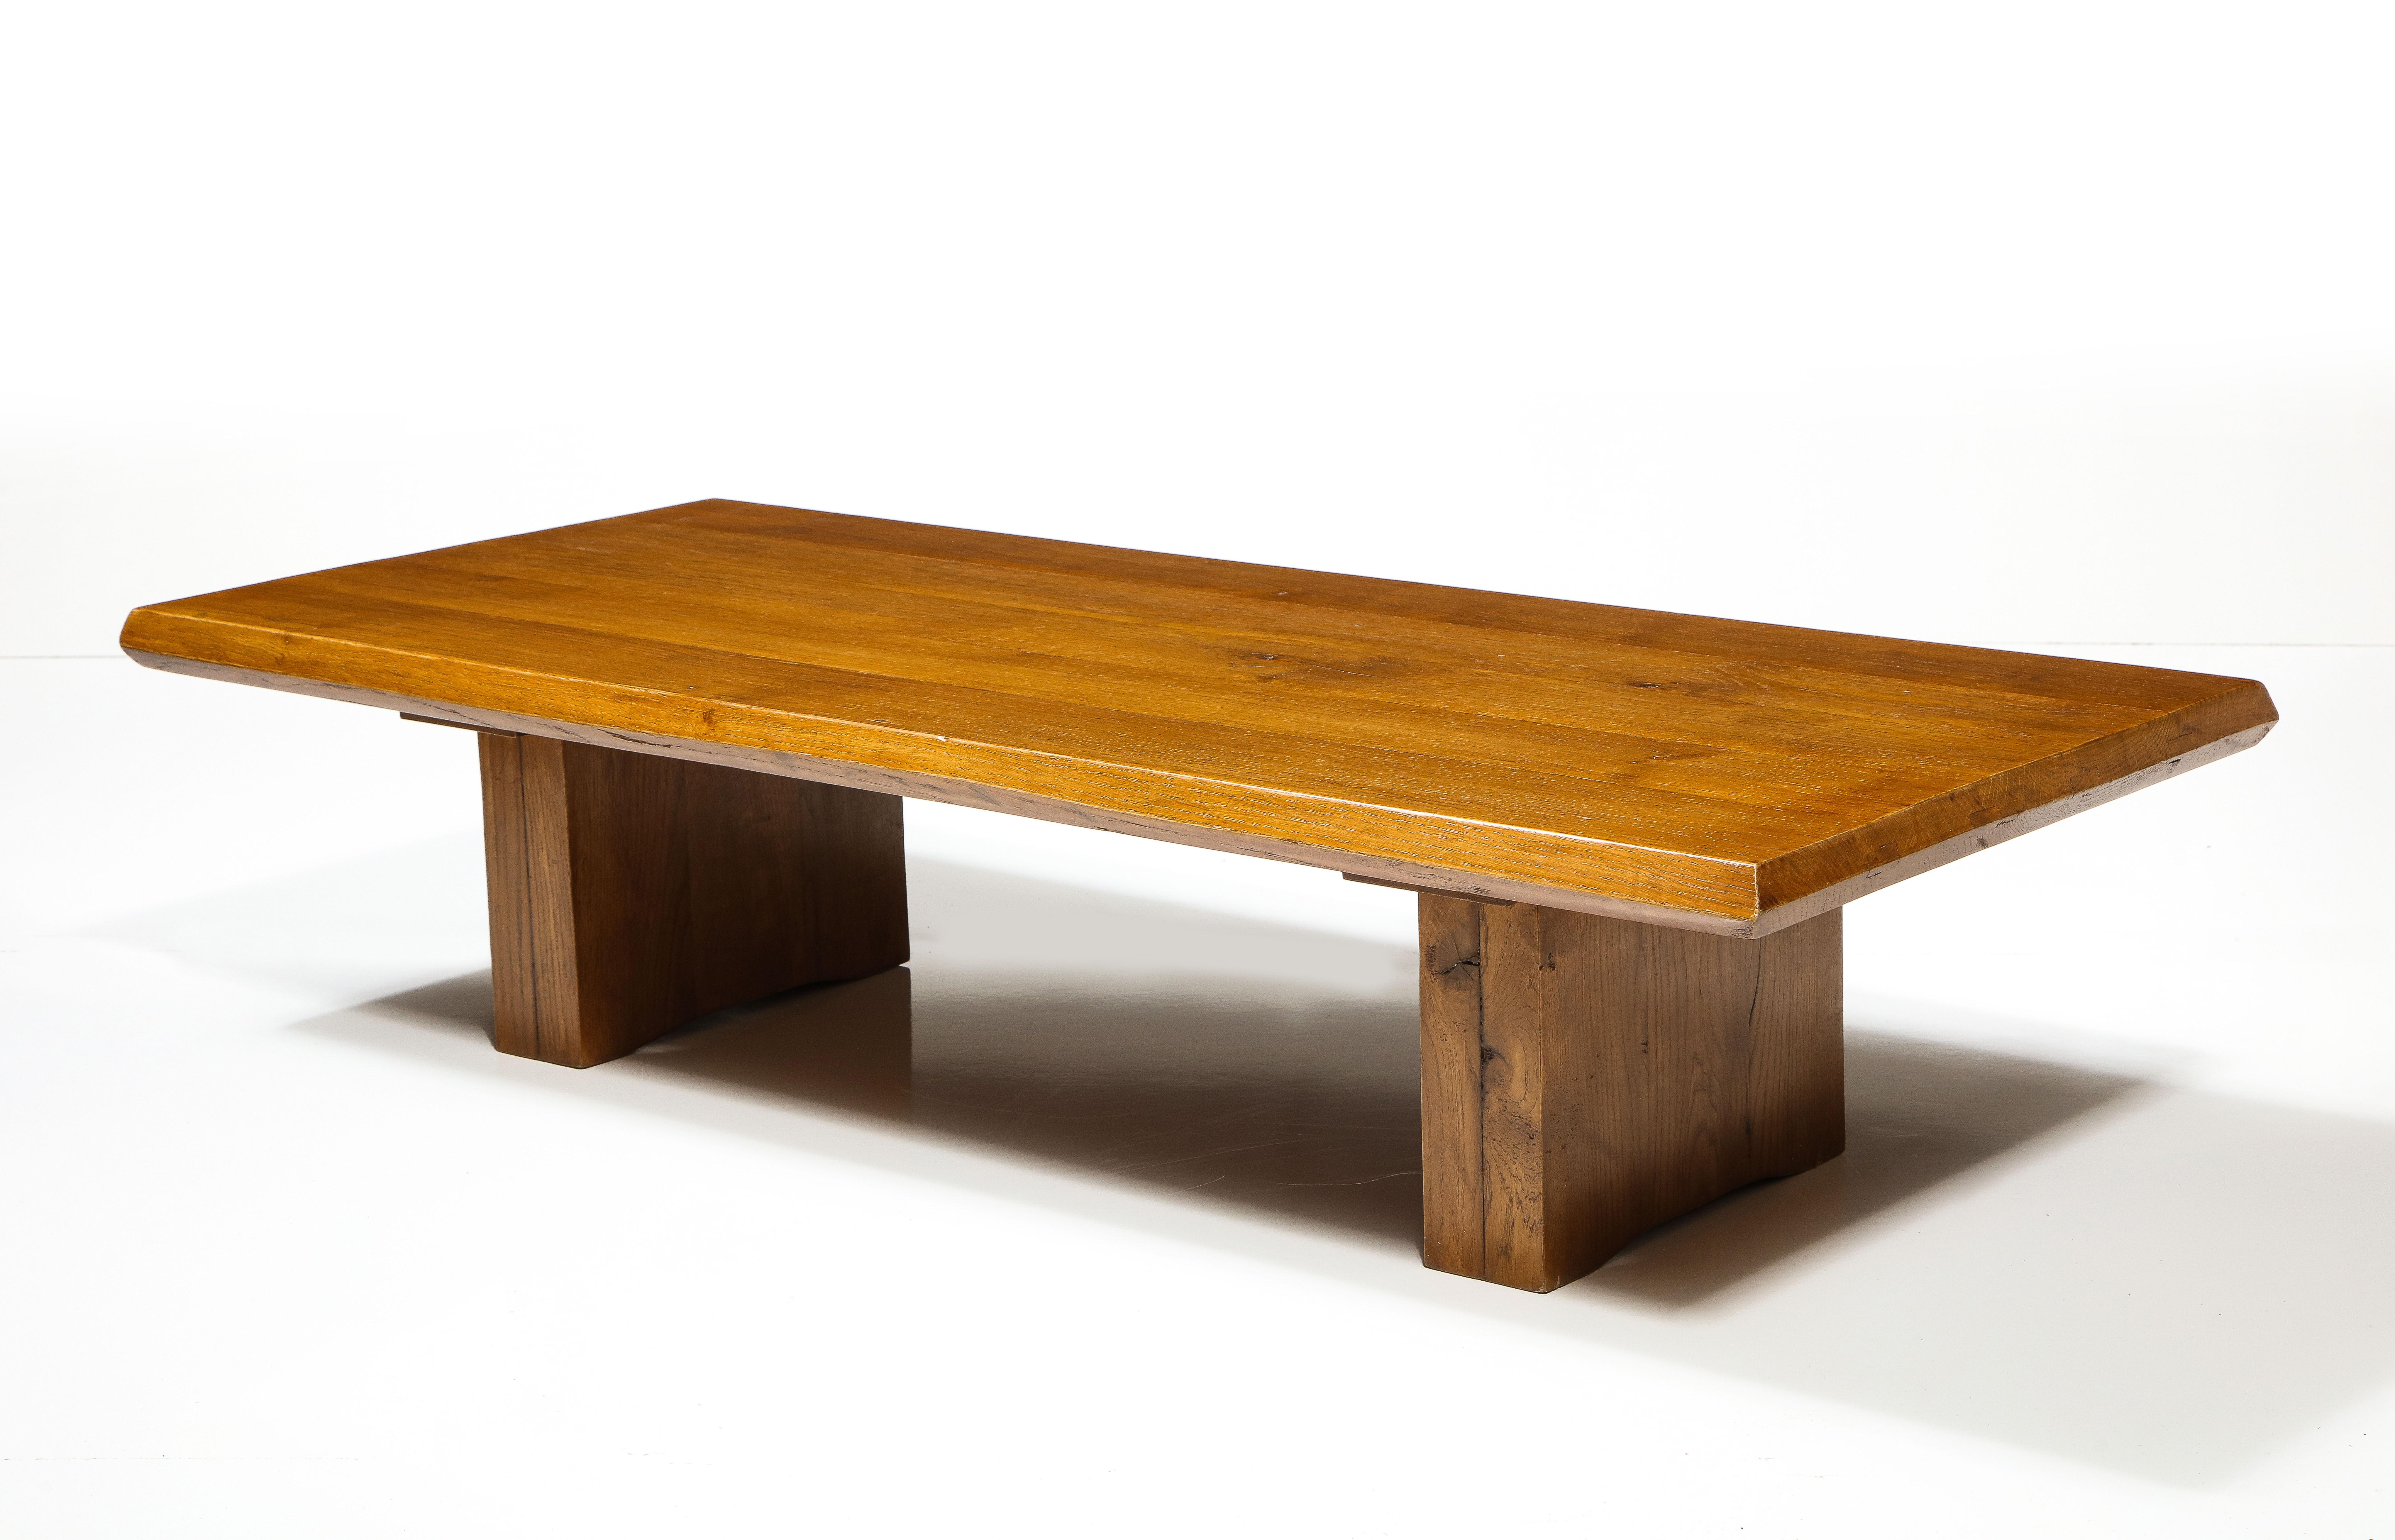 Coffee Table Attributed to Charlotte Perriand, France, c. Mid-20th Century.

Simple yet sophisticated coffee table consists of a solid hardwood construction, sizeable rectangular top, and handsome plinth feet typical of acclaimed French architect